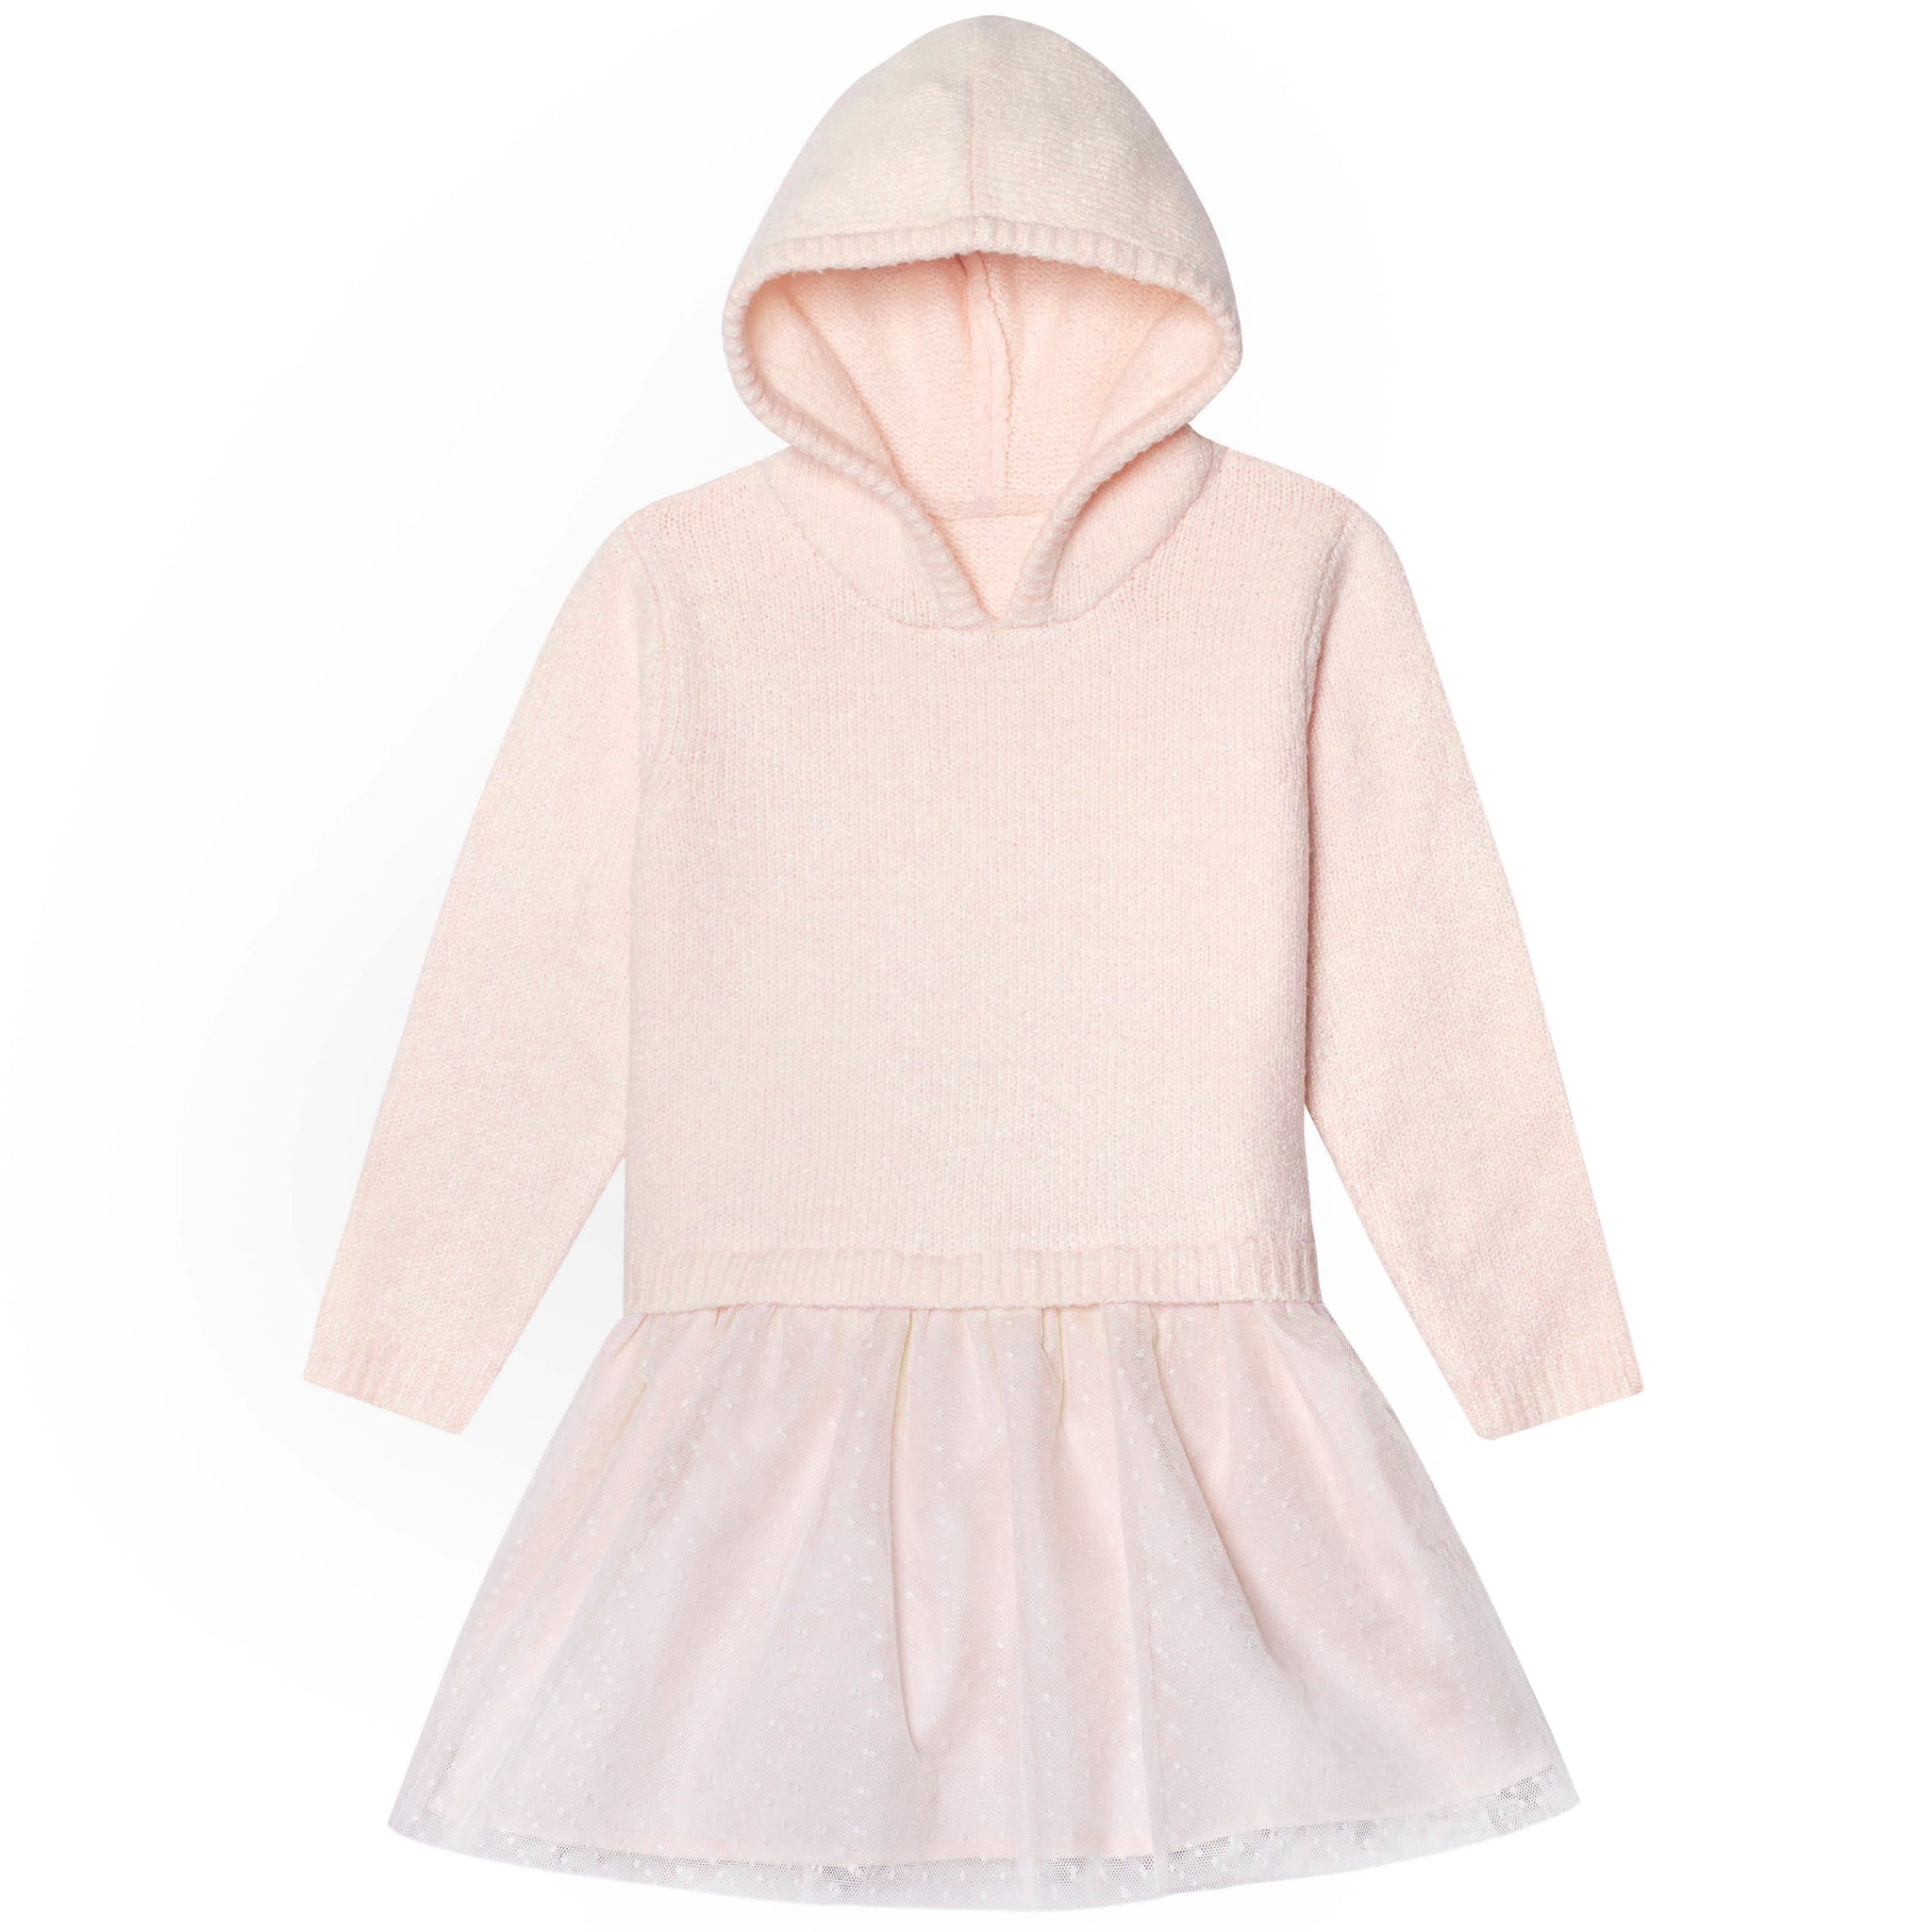 Infant & Toddler Girls Light Pink Sweater Dress With Tulle Skirt-Gerber Childrenswear Wholesale